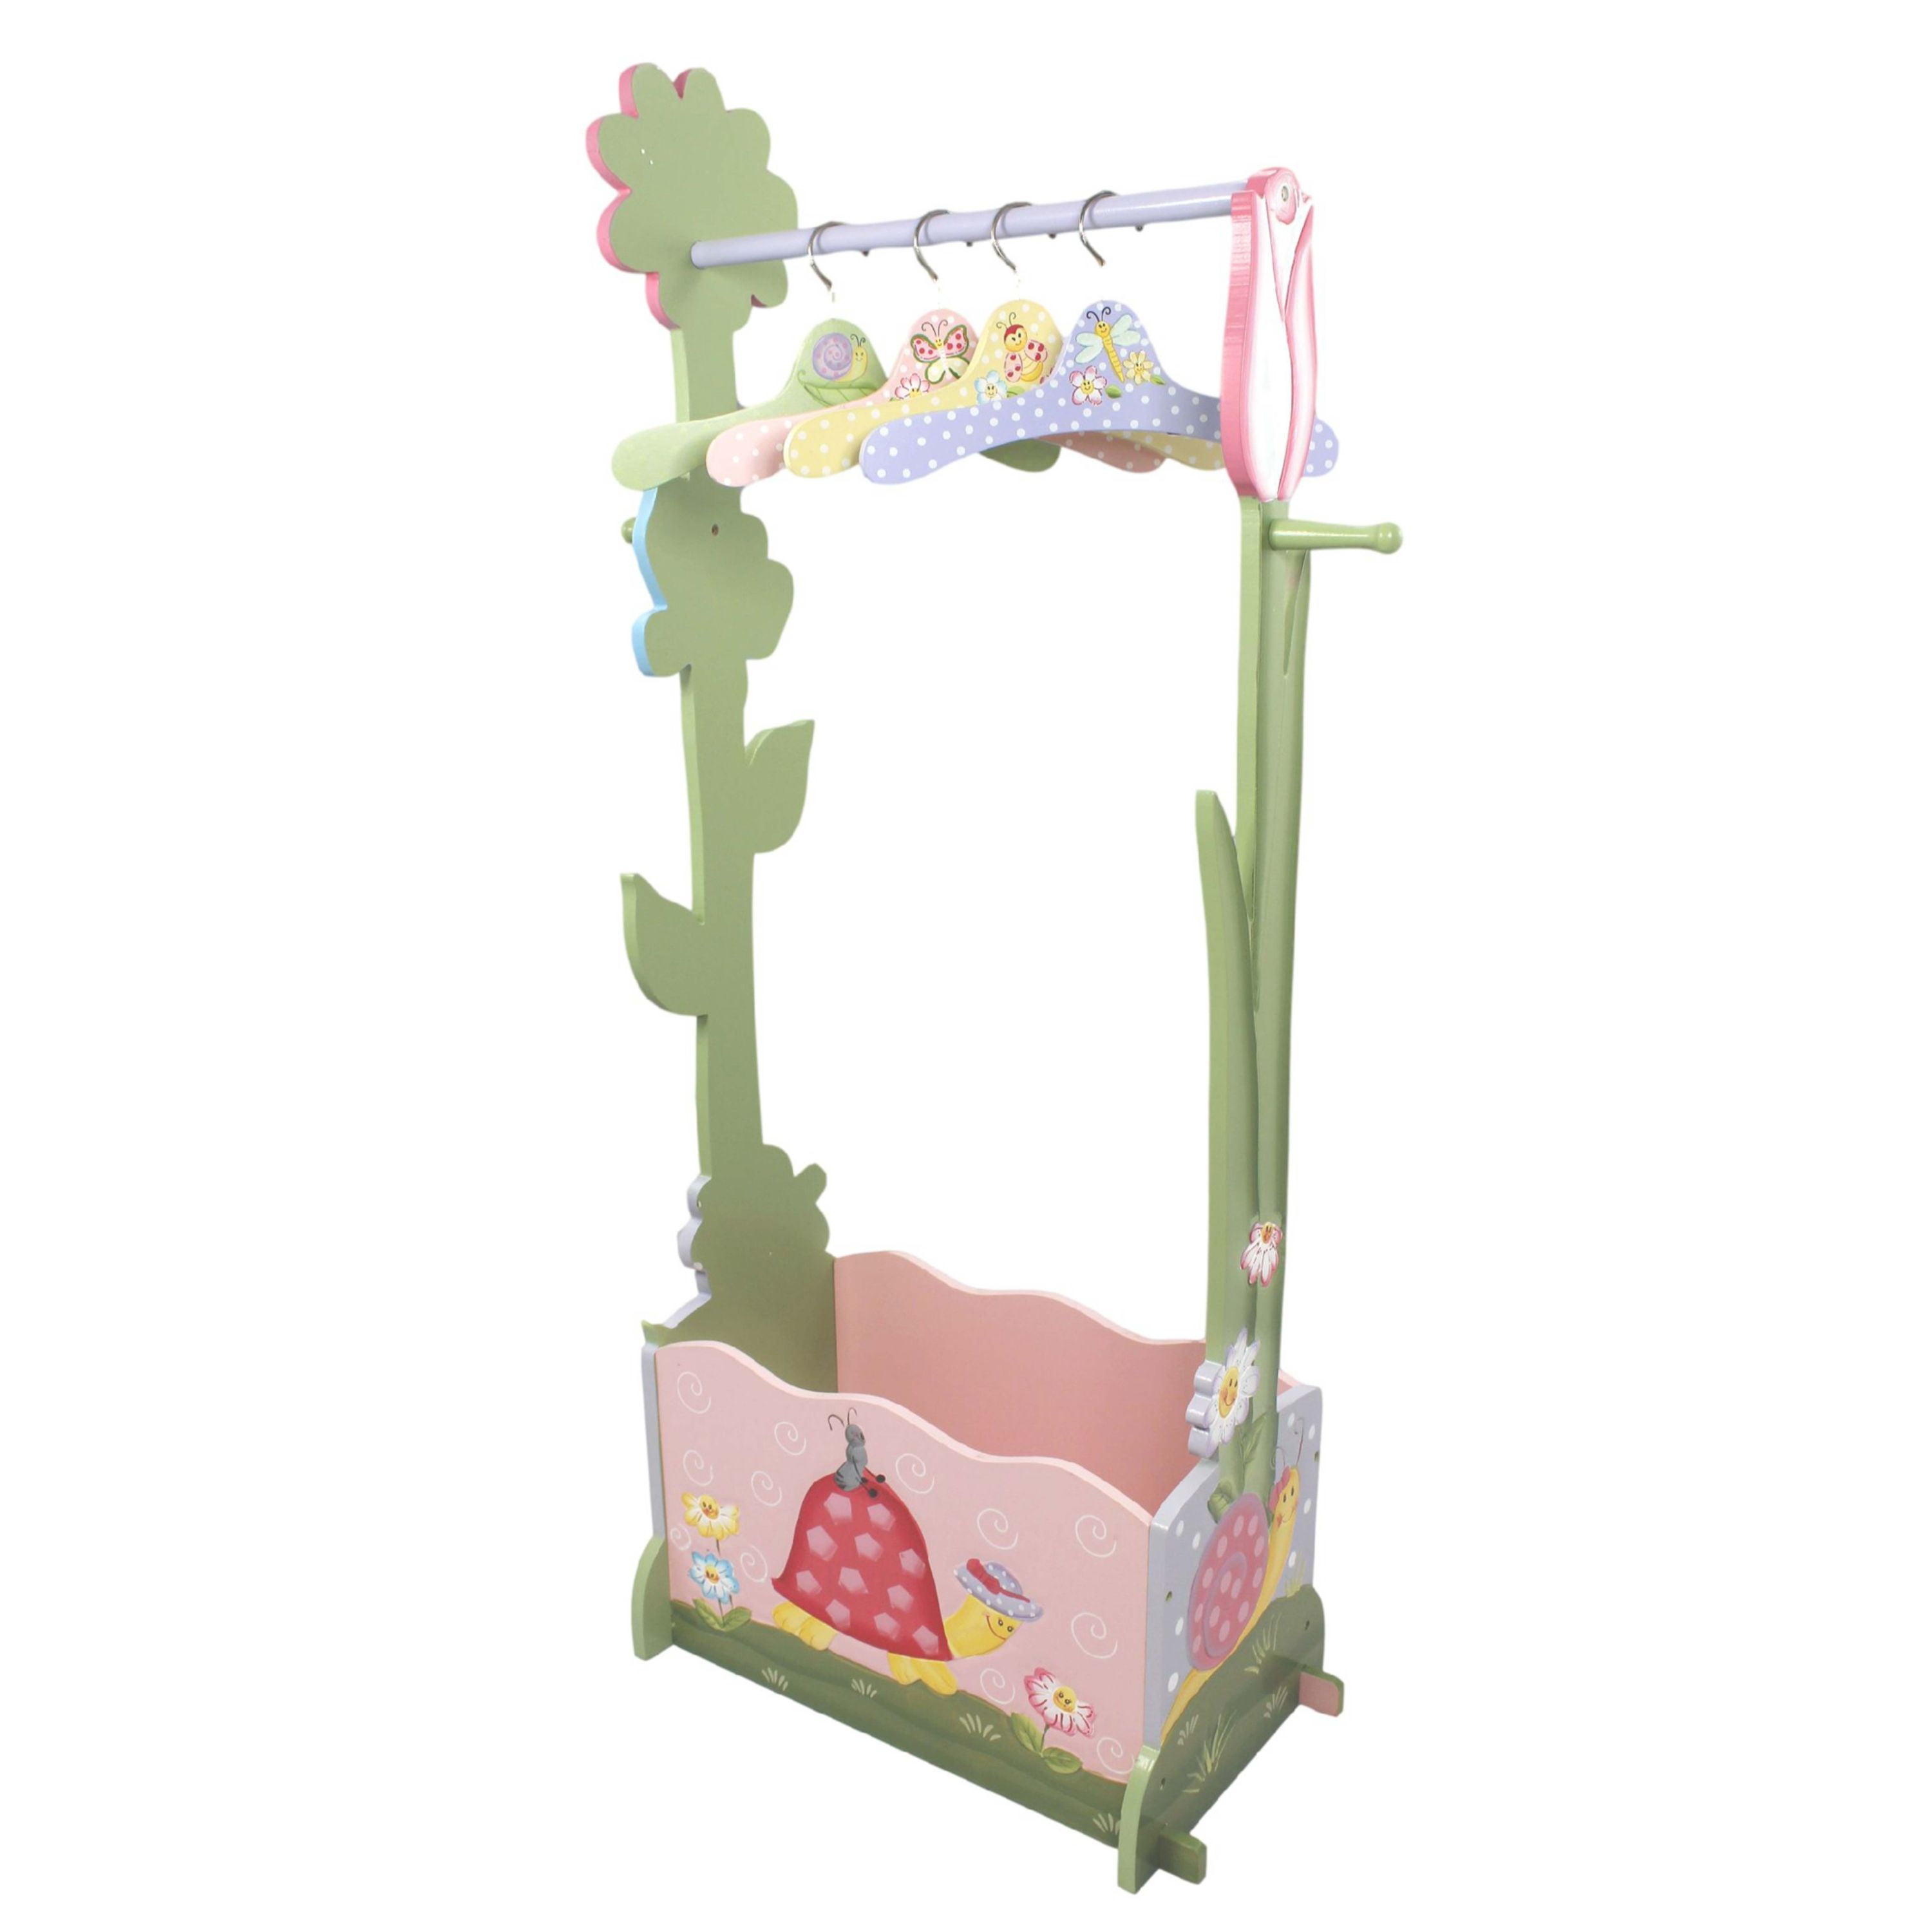 Fantasy Fields Magic Garden themed Pink Book Case Kids Wooden Bookcase with Storage Drawer & Magic Garden themed Wooden Dress Up Storage Station Clothing Rail Rack with Set of 4 Hangers